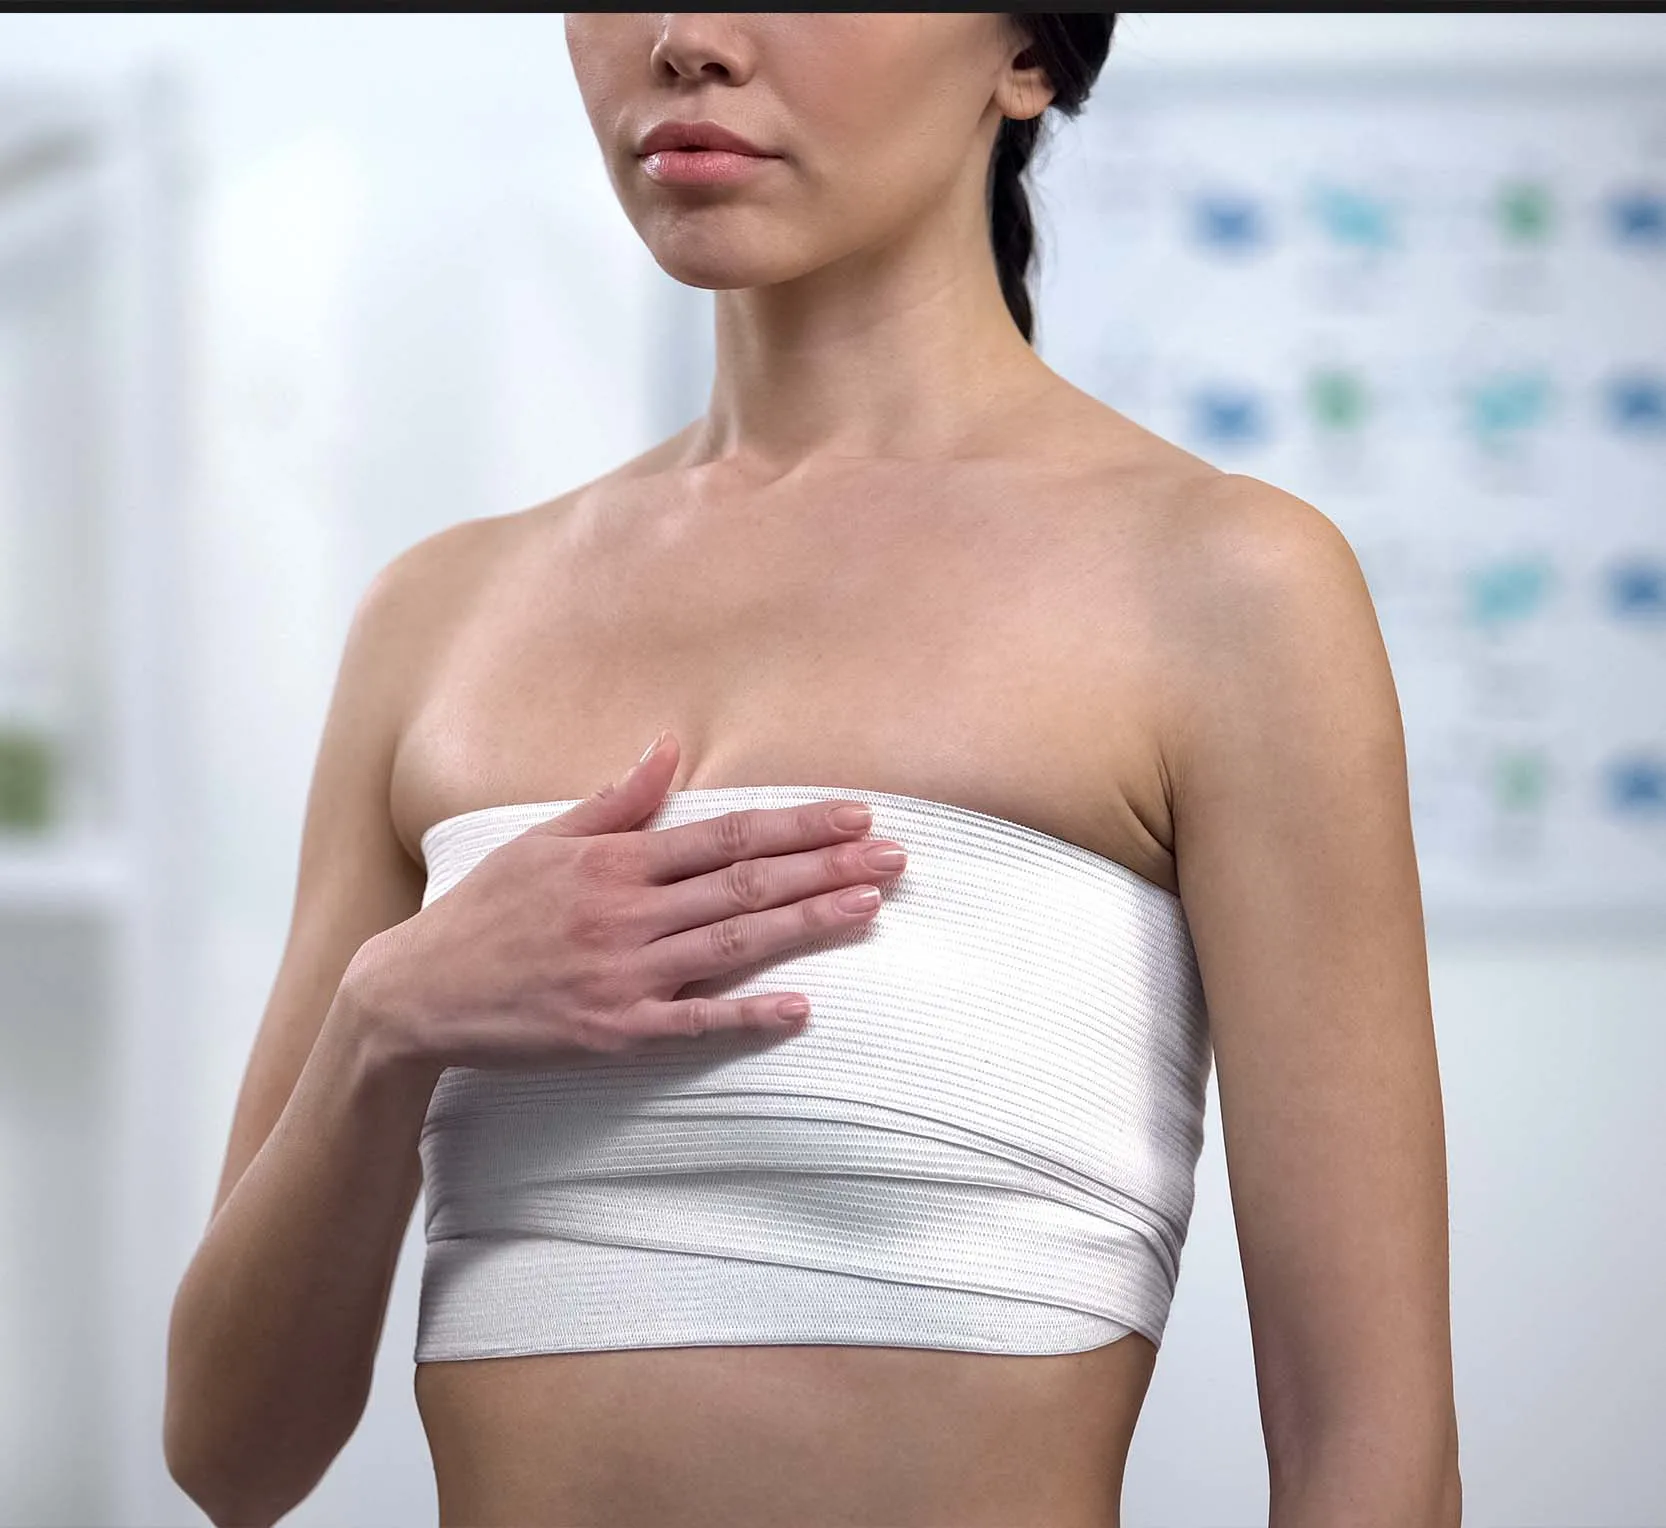 Mediguide Istanbul: Breast Surgery - Breast Reconstruction